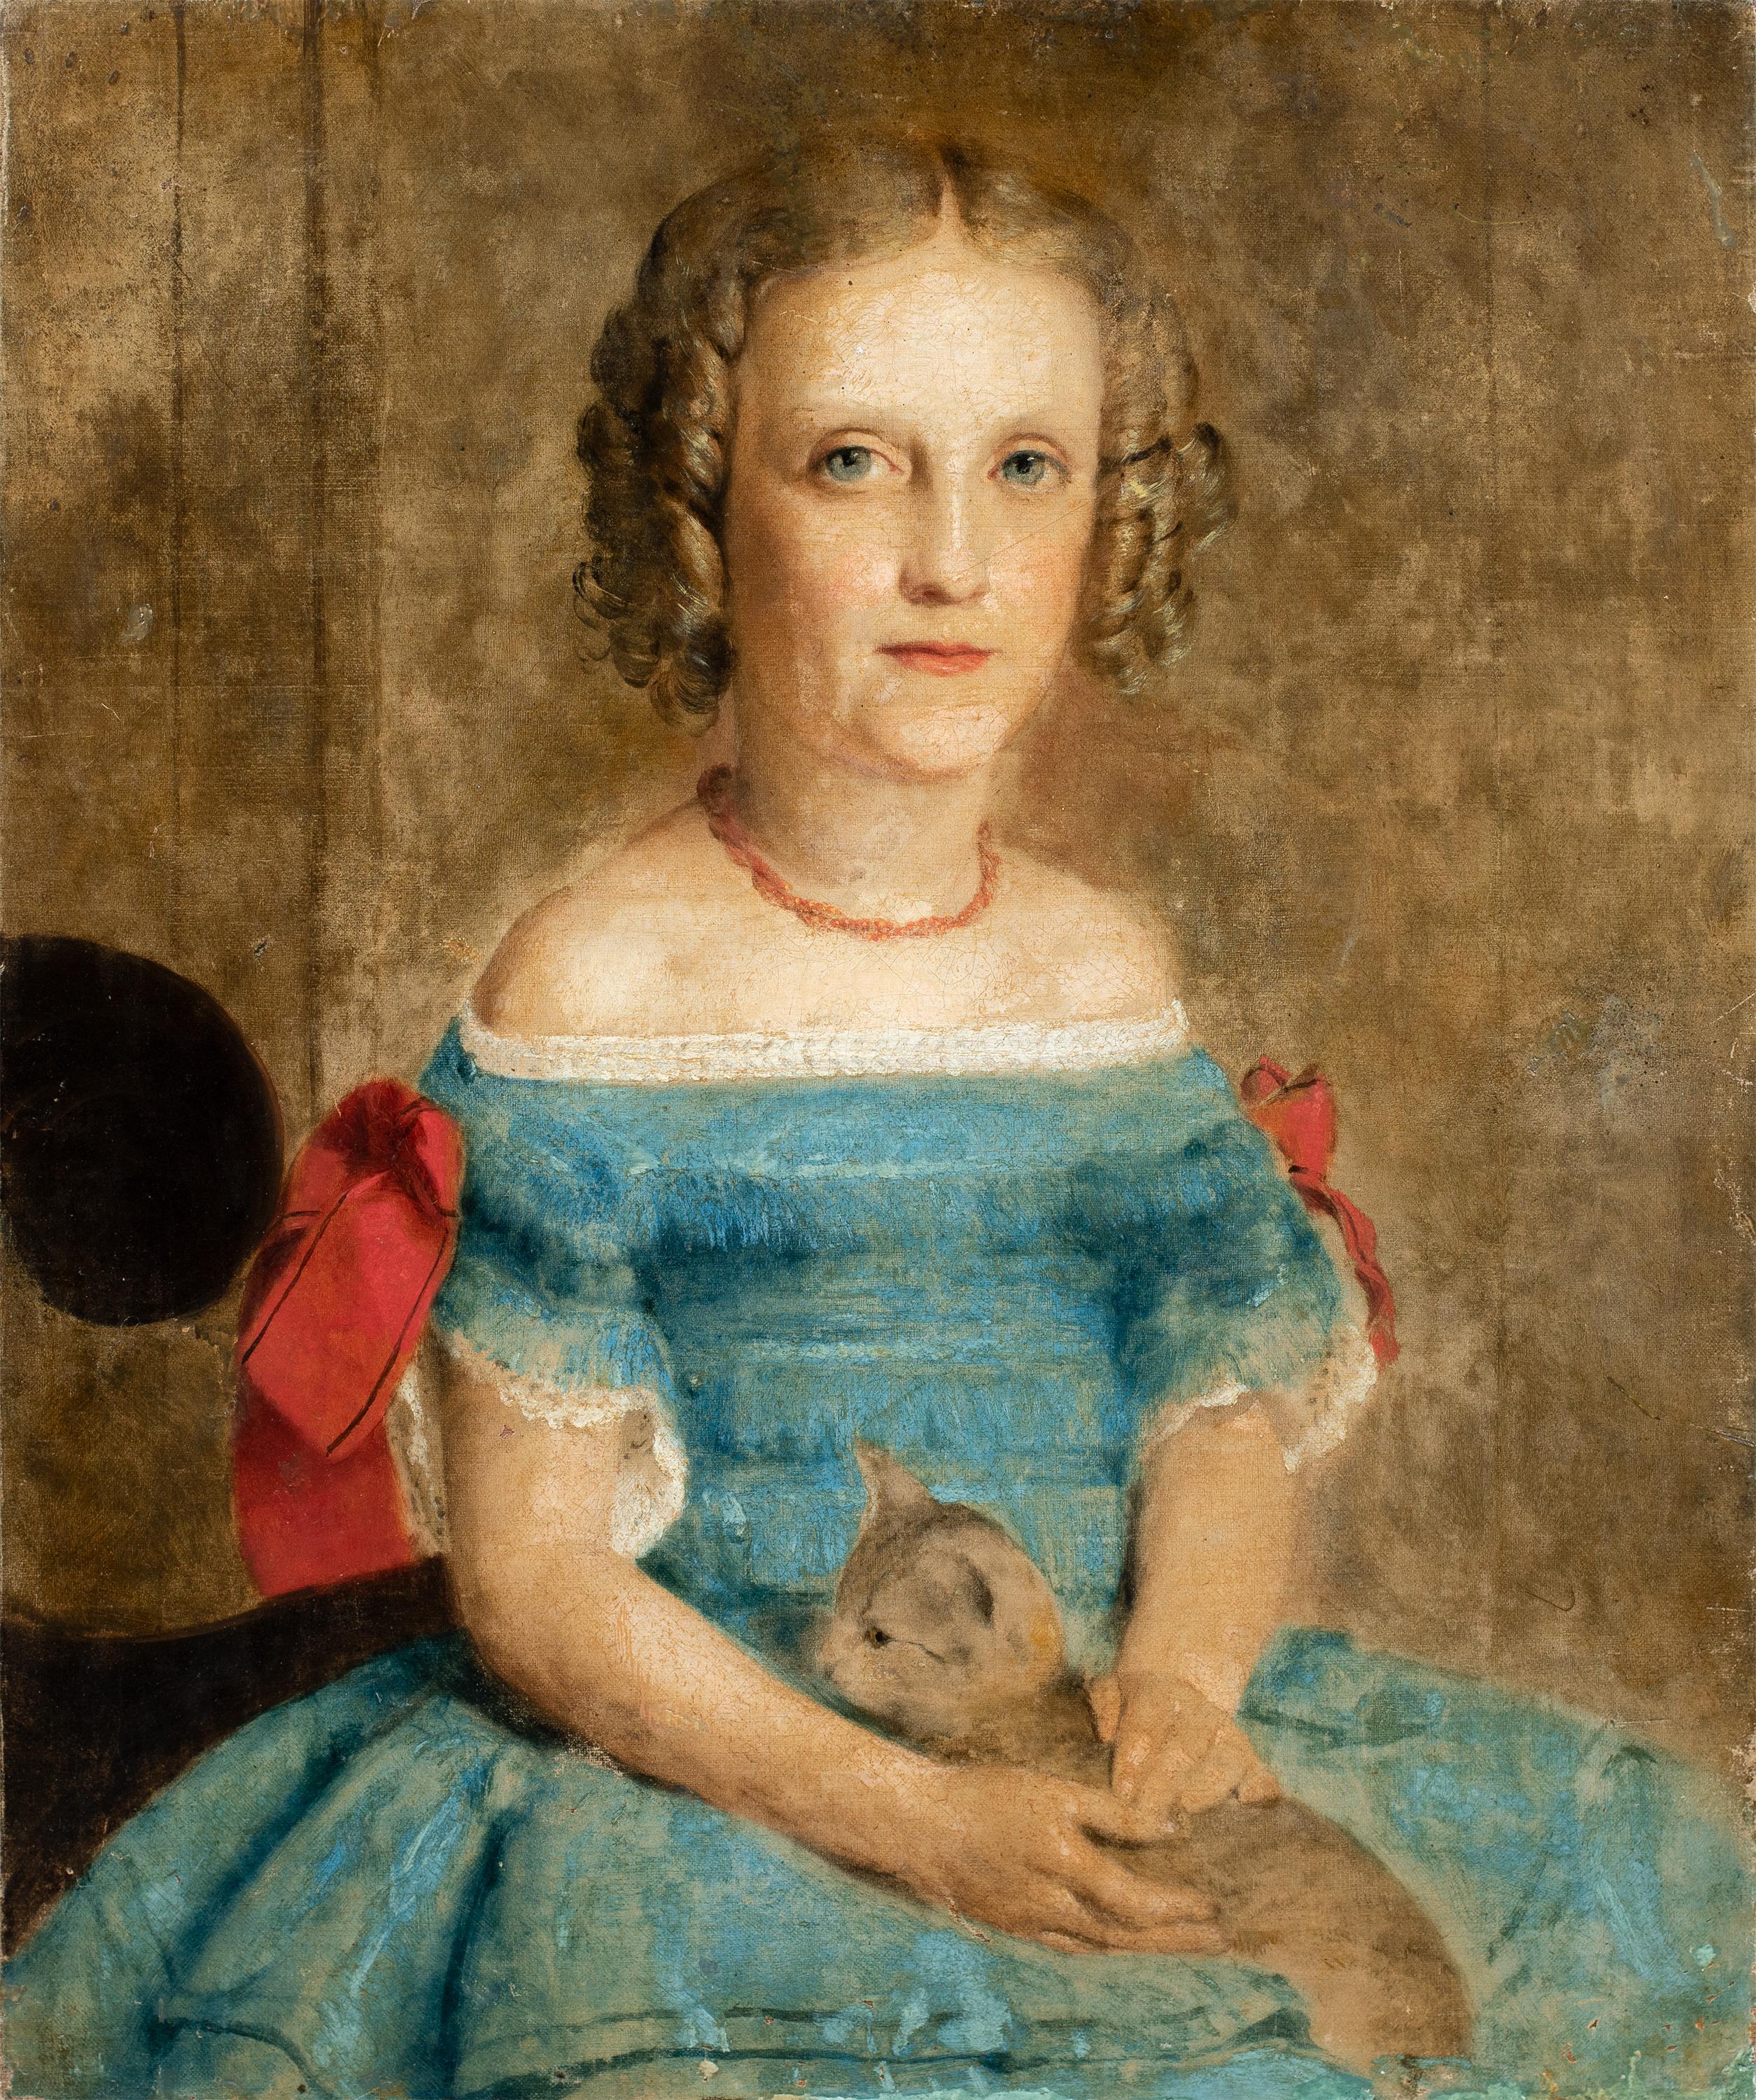 Late 19th century British figure painting - Girl’s portait with cat - English